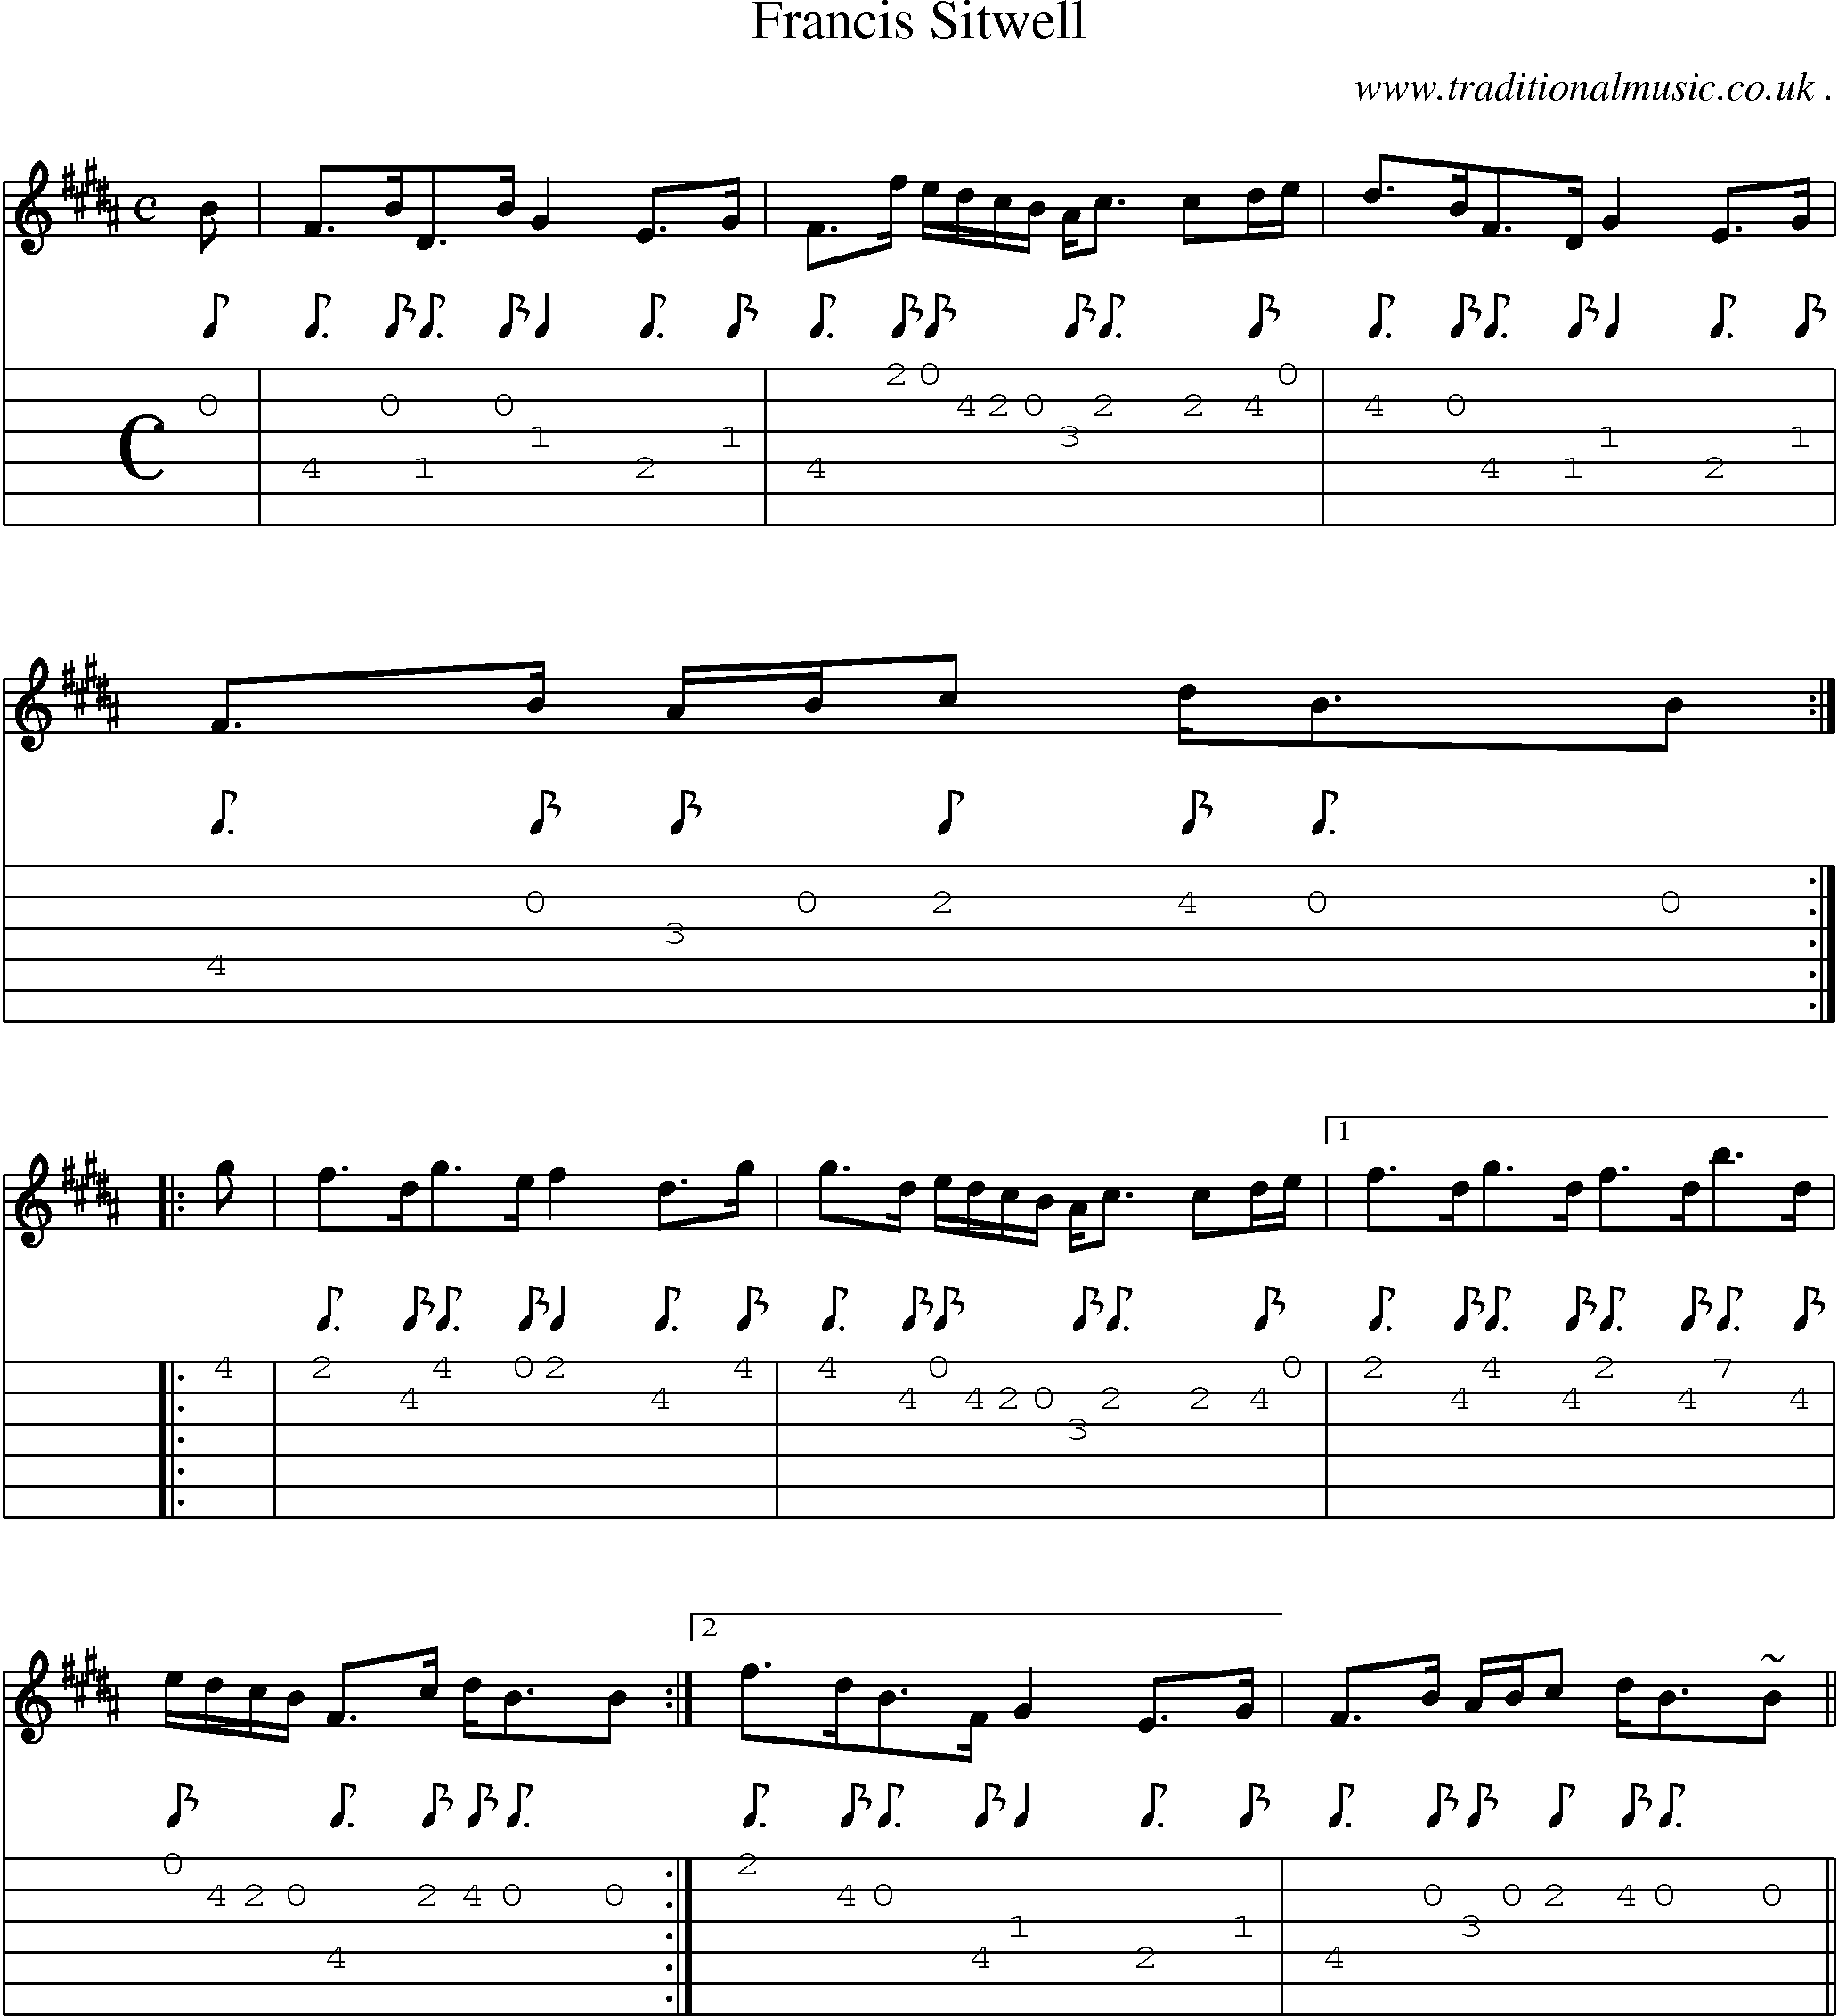 Sheet-music  score, Chords and Guitar Tabs for Francis Sitwell